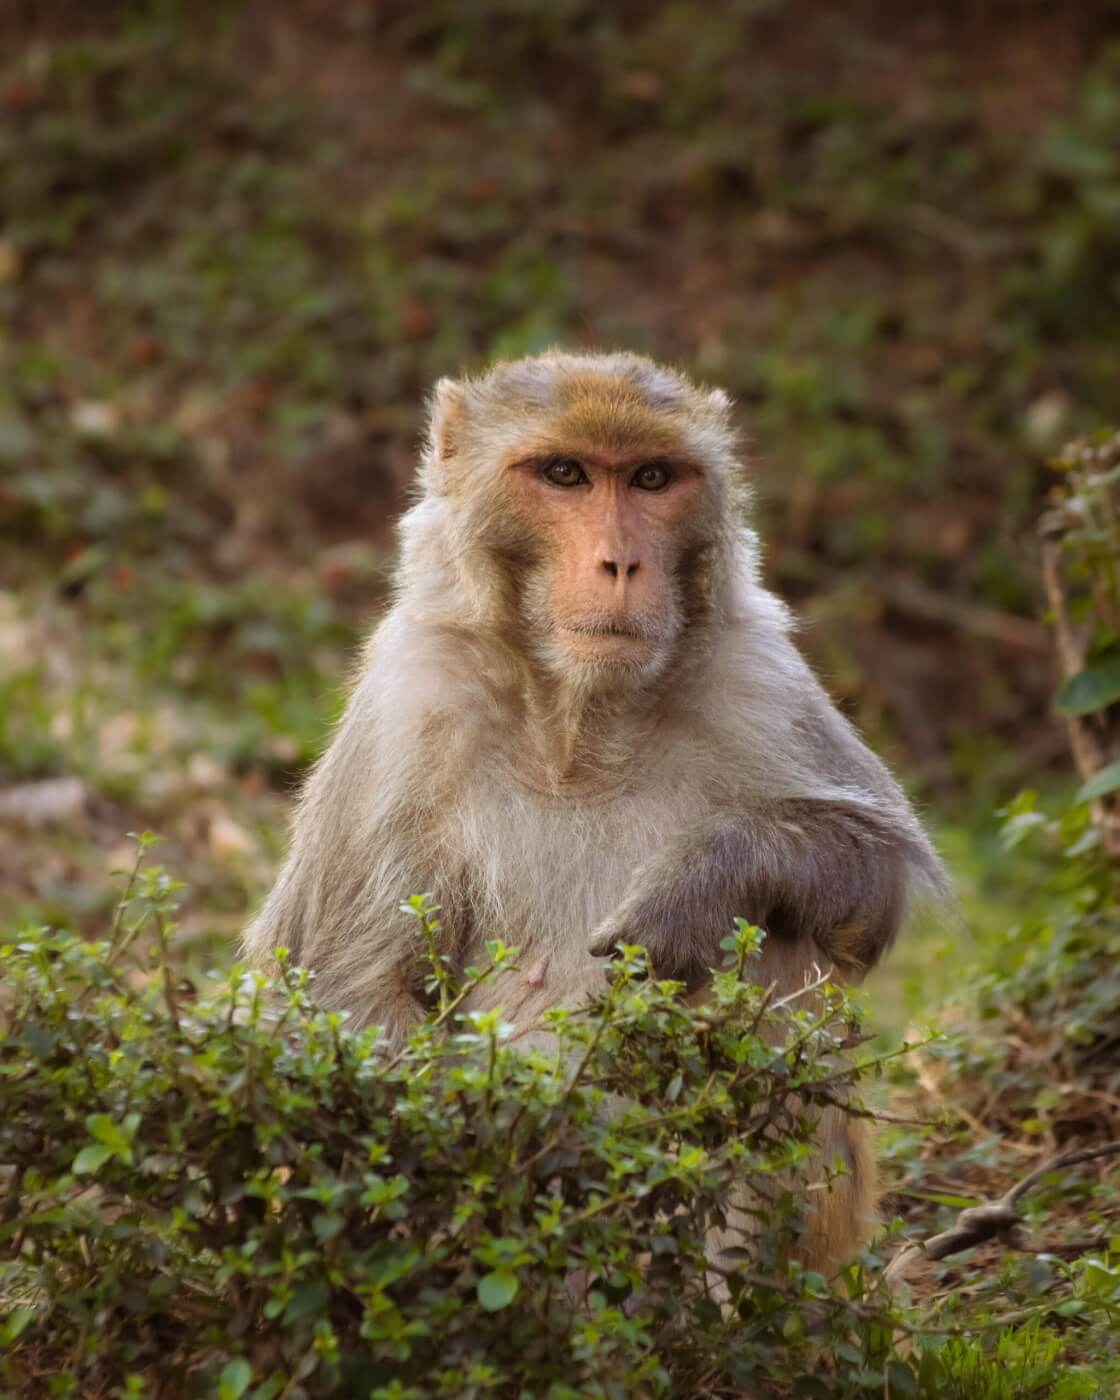 India’s Monkeys Threatened by Foreign Animal Experimenters Need Protection